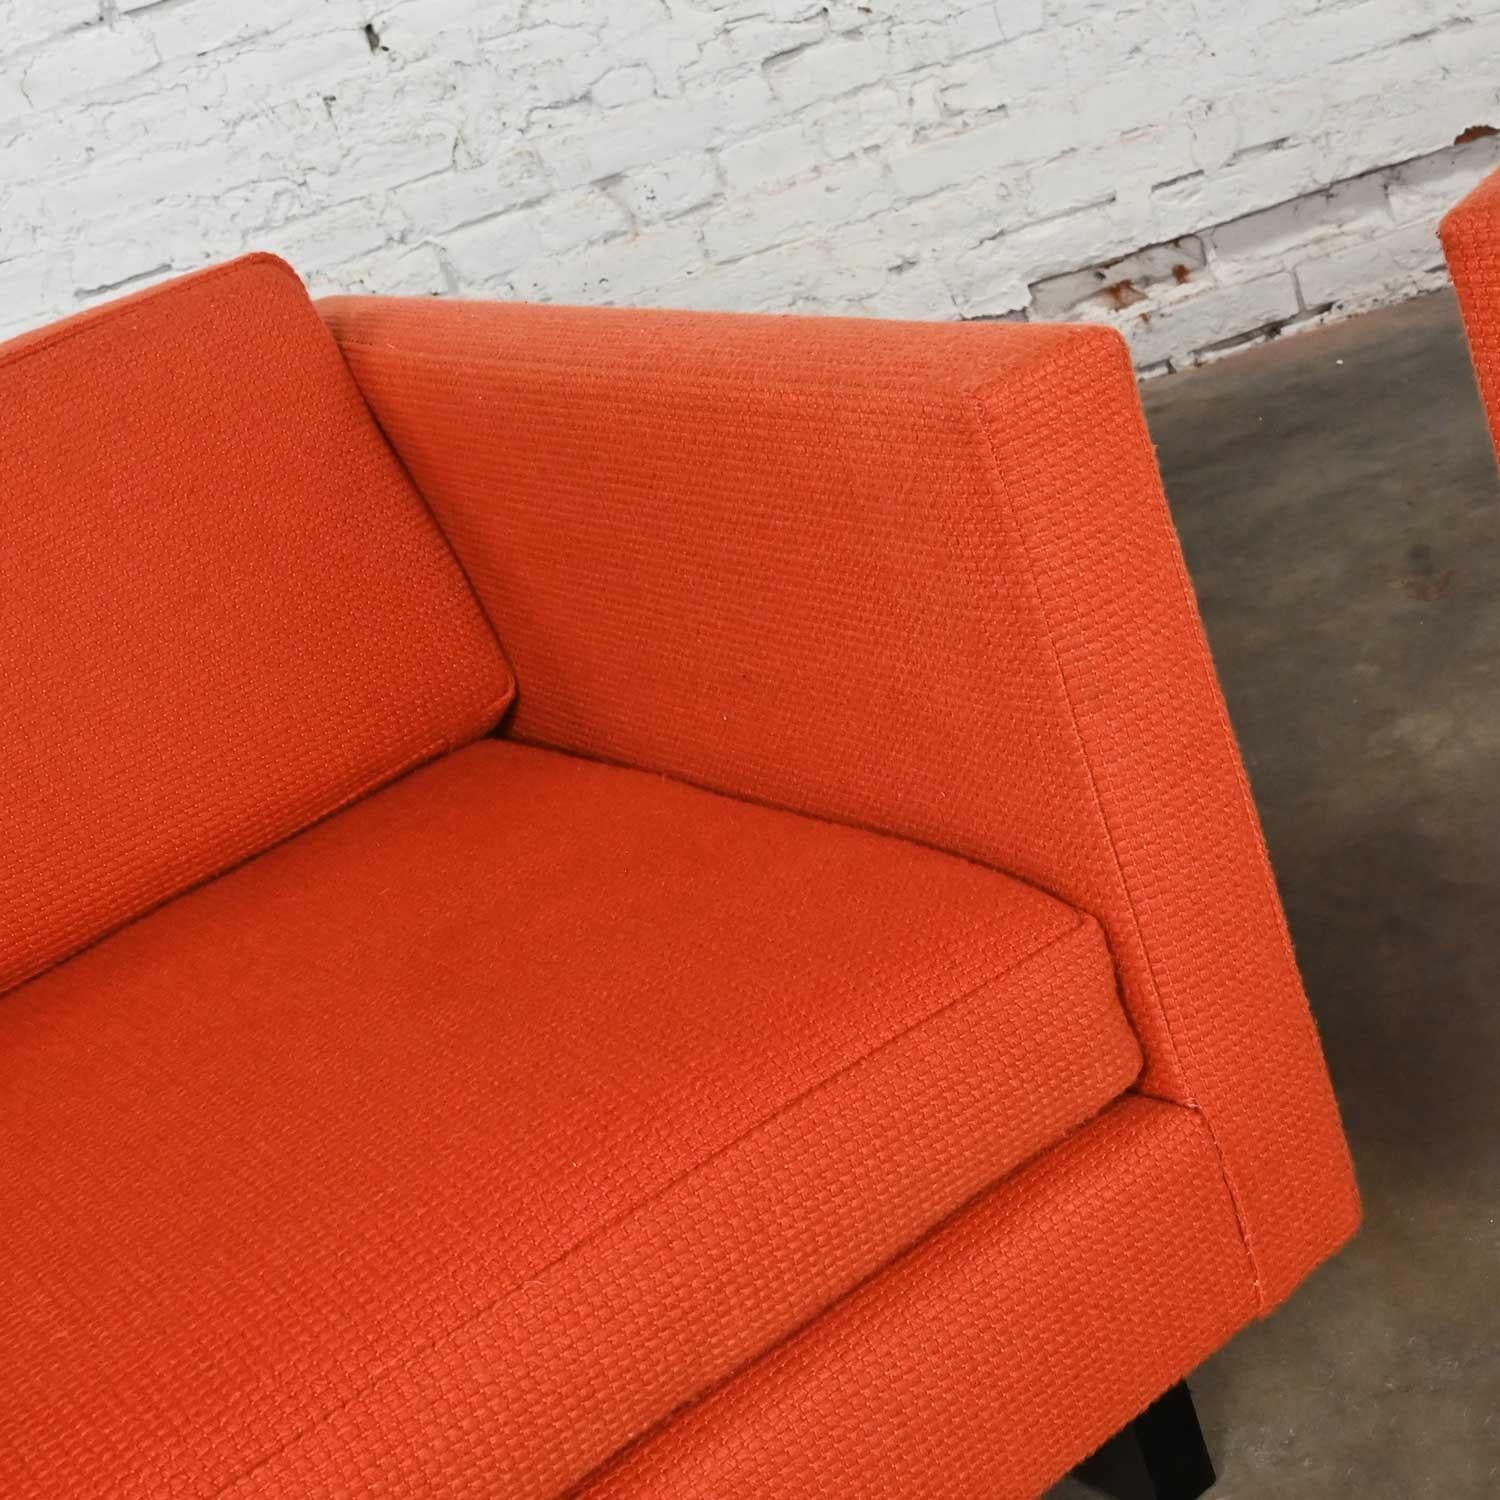 1970s Mcm to Modern Harvey Probber Club Chairs Orange 1571 Tuxedo Sleigh Bases For Sale 11